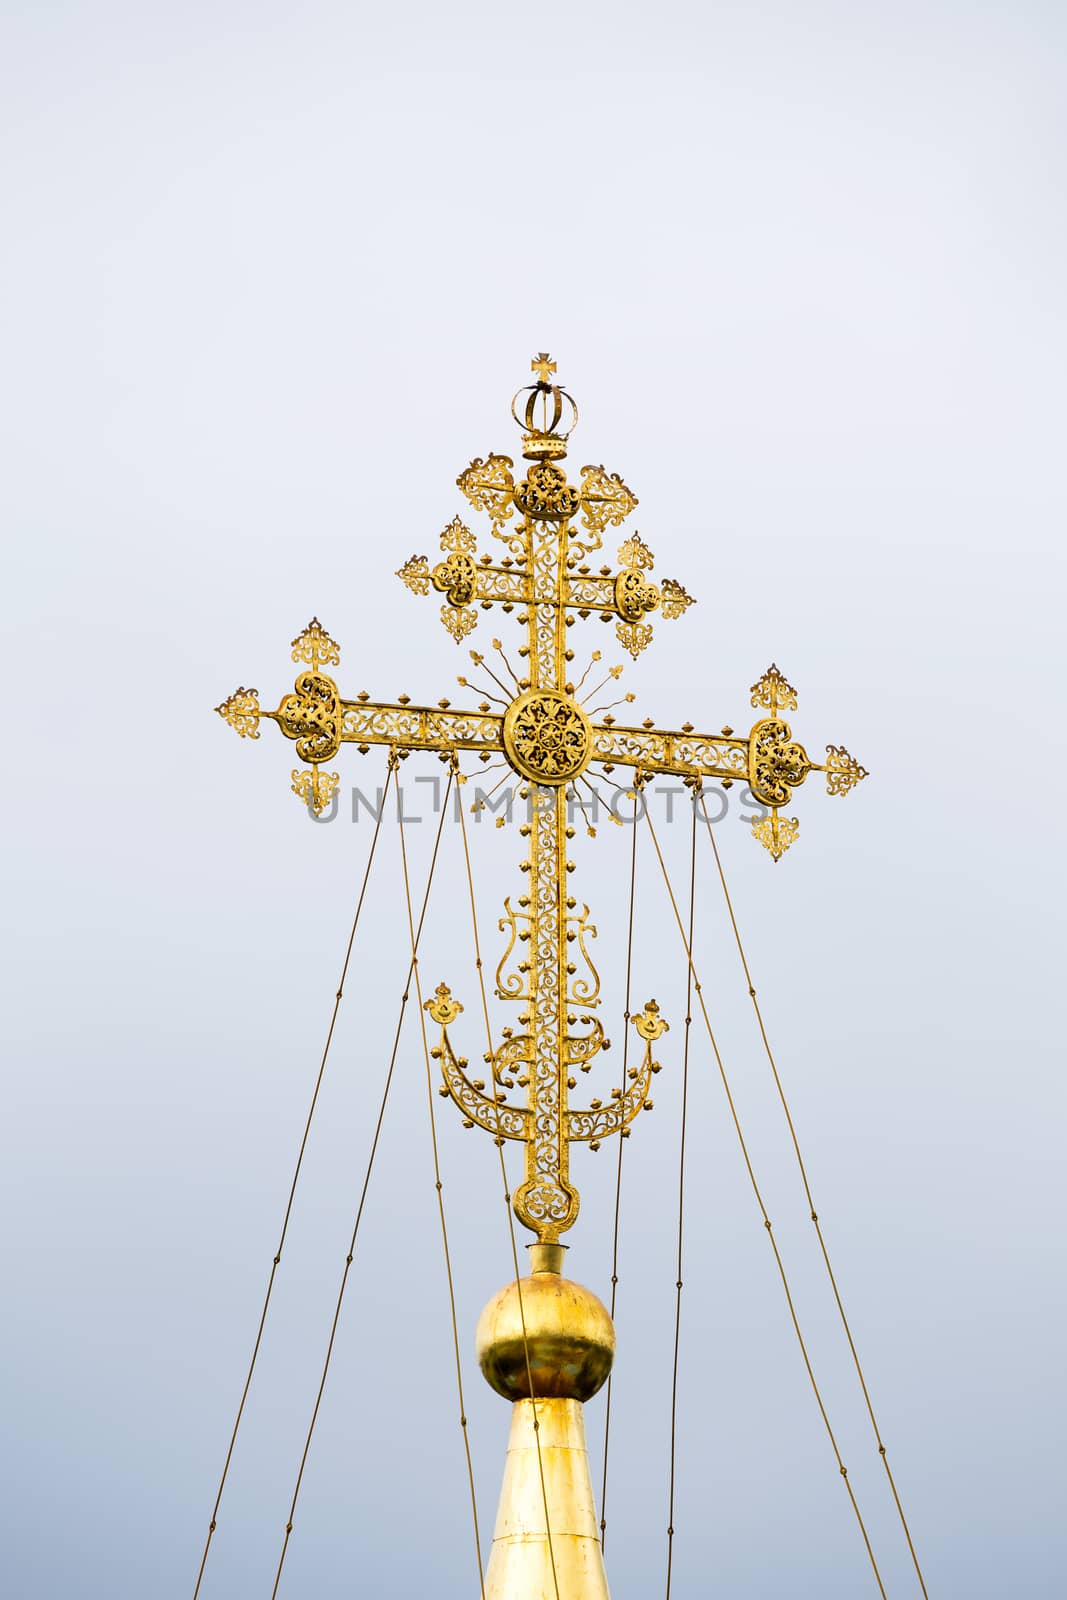 Gold cross of the central dome of the Cathedral of the Assumption of Blessed Virgin Mary by straannick